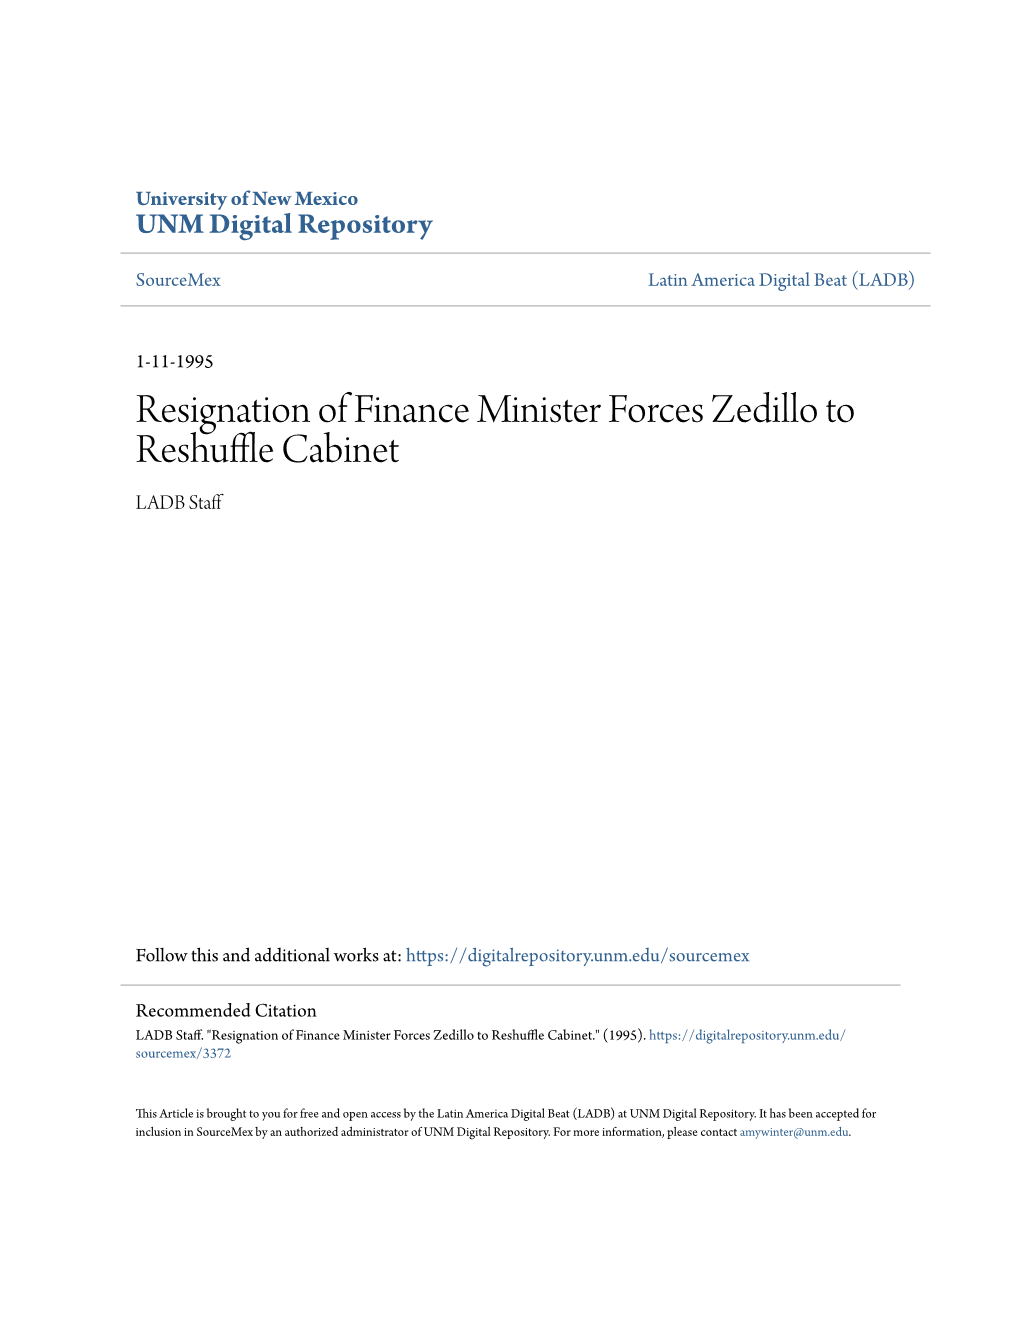 Resignation of Finance Minister Forces Zedillo to Reshuffle Cabinet by LADB Staff Category/Department: Mexico Published: 1995-01-11